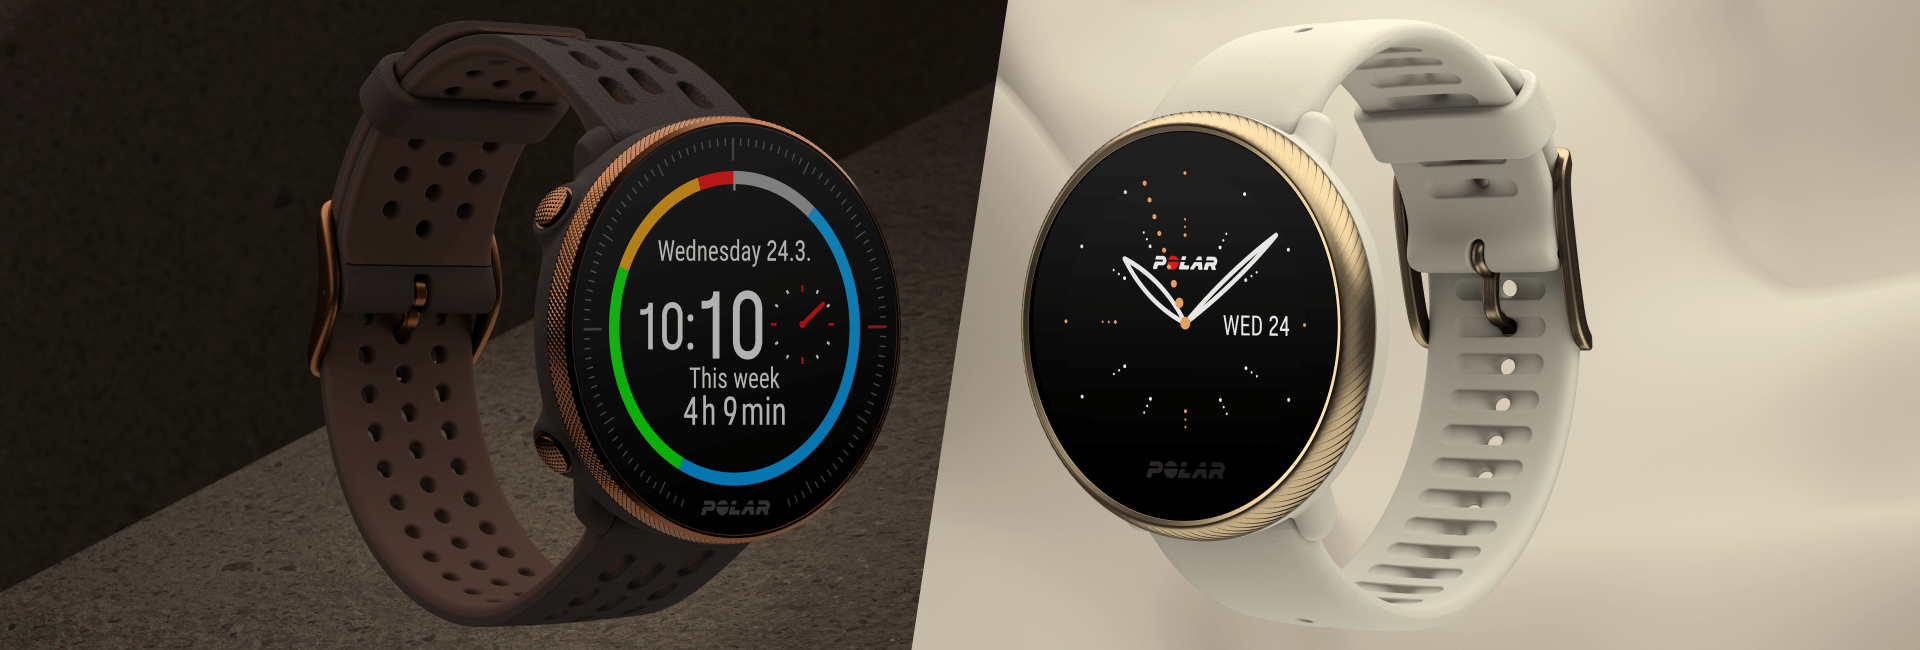 Polar Vantage M2 vs. Polar Ignite 2- Multisport or Fitness?  The Choice Is Yours